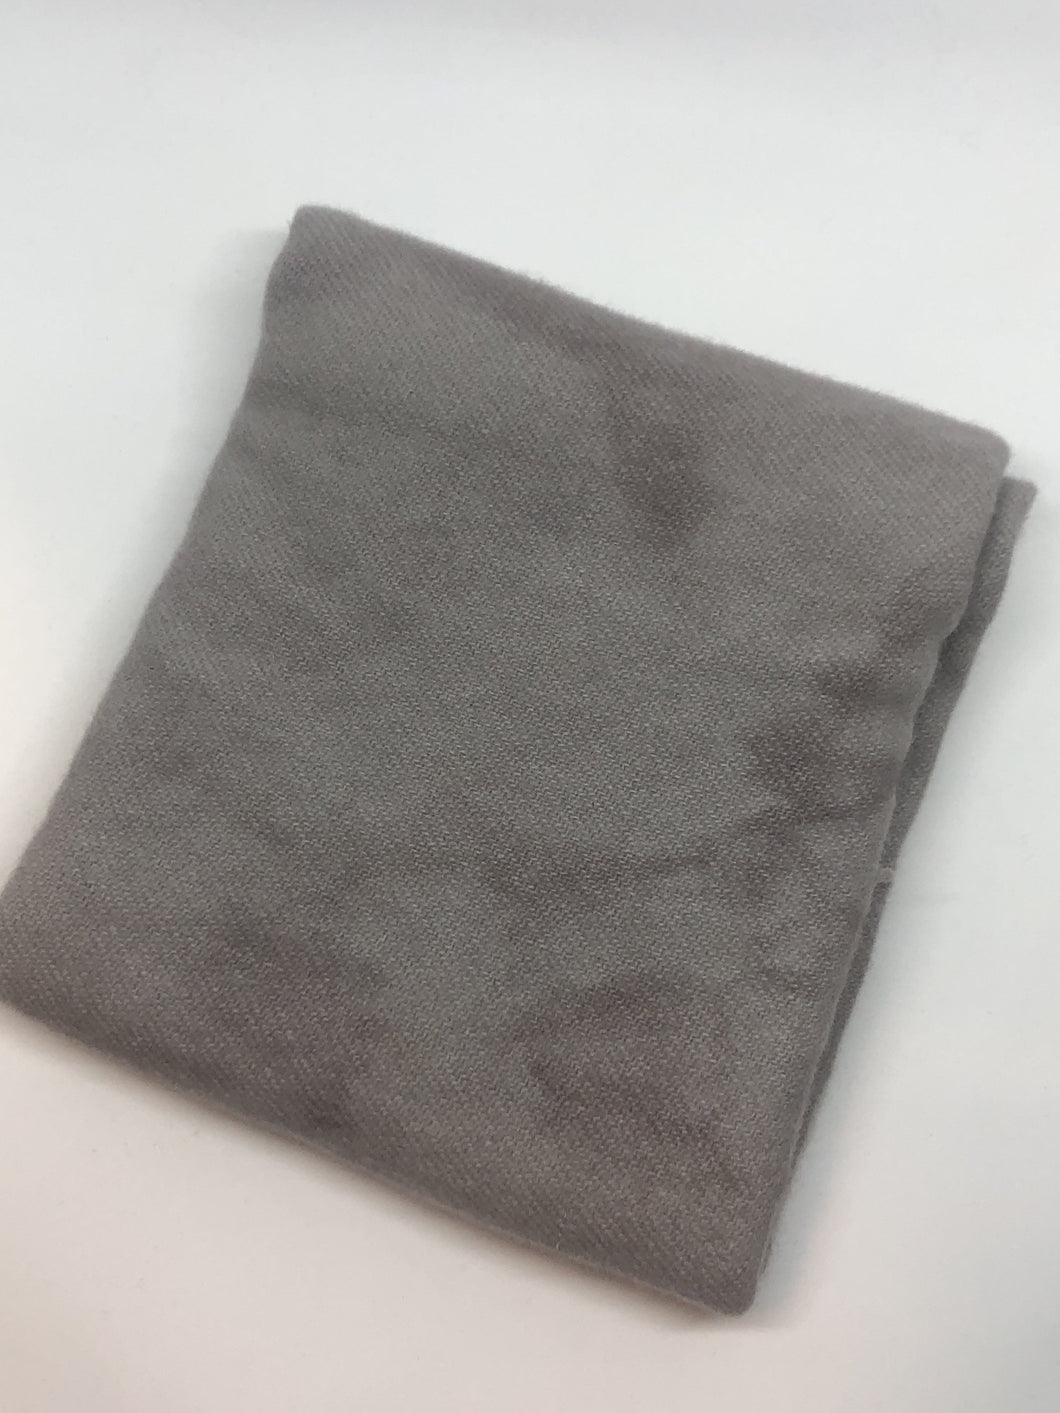 Hand-Dyed Wool Cloth